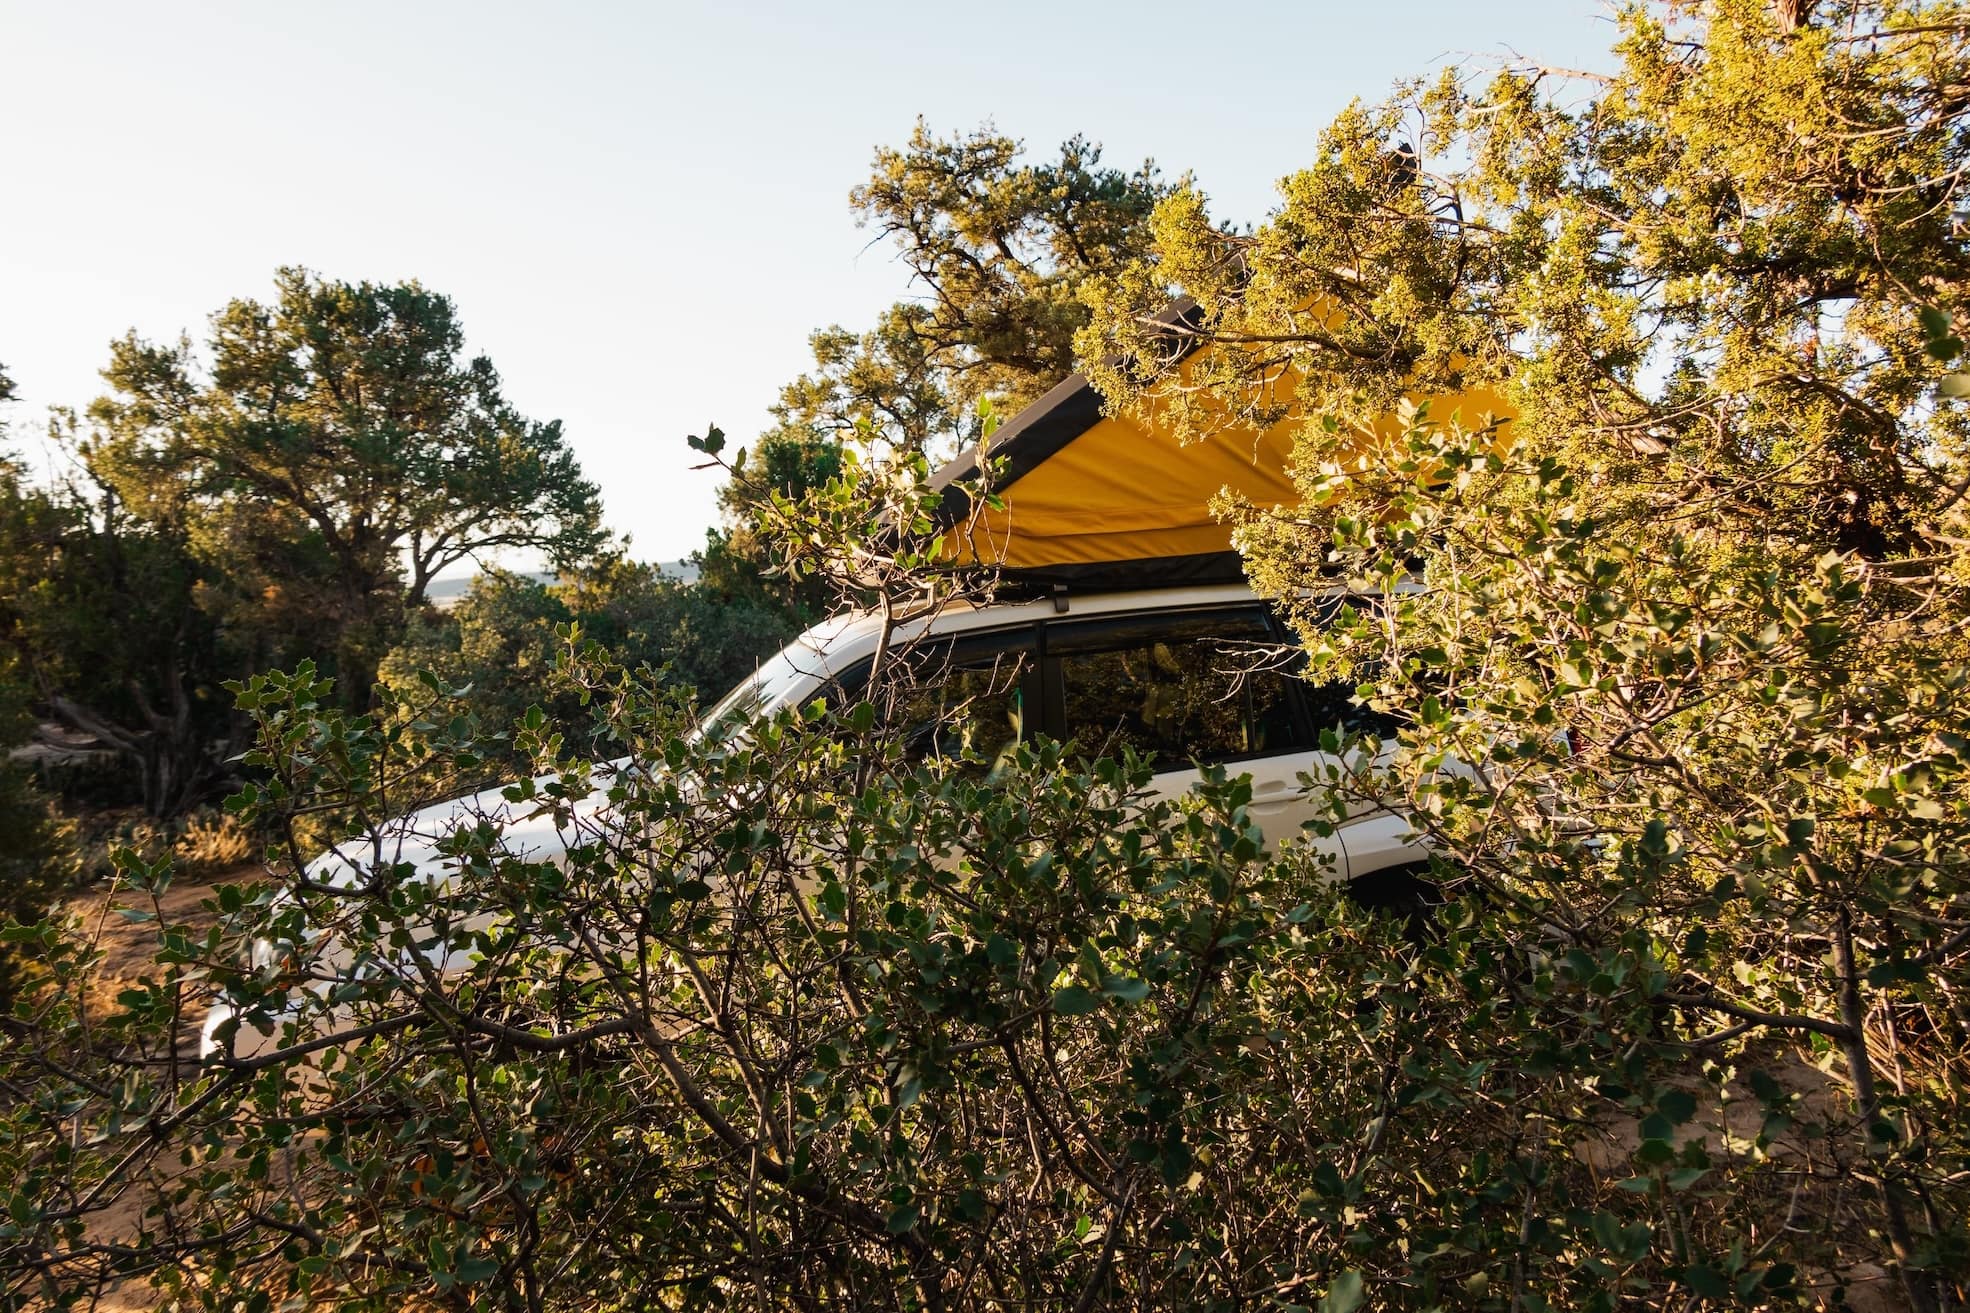 A white SUV with a yellow rooftop tent parked in a wooded area, partially obscured by the surrounding greenery, evoking a sense of adventure and outdoor living.